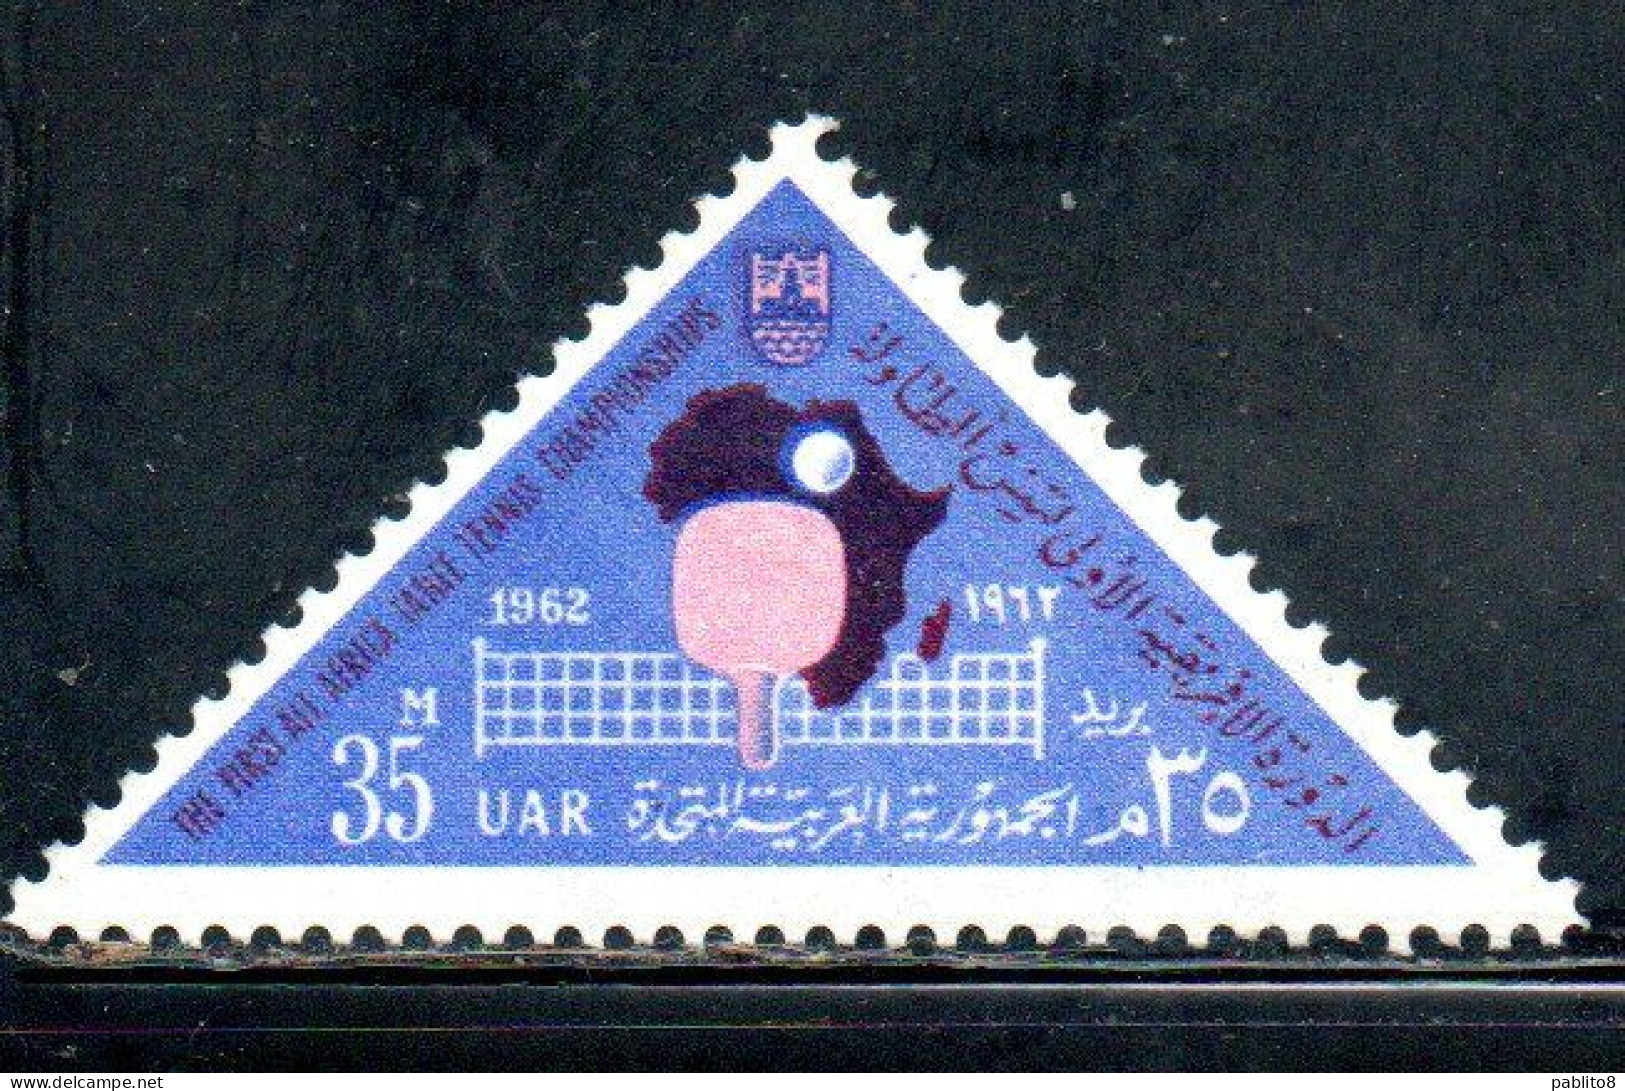 UAR EGYPT EGITTO 1962 WORLD SHOOTING CHAMPIONSHIPS AND AFRICAN TABLE TENNIS TOURNAMENT MAP AFRICA PADDLE NET 35m MNH - Ungebraucht